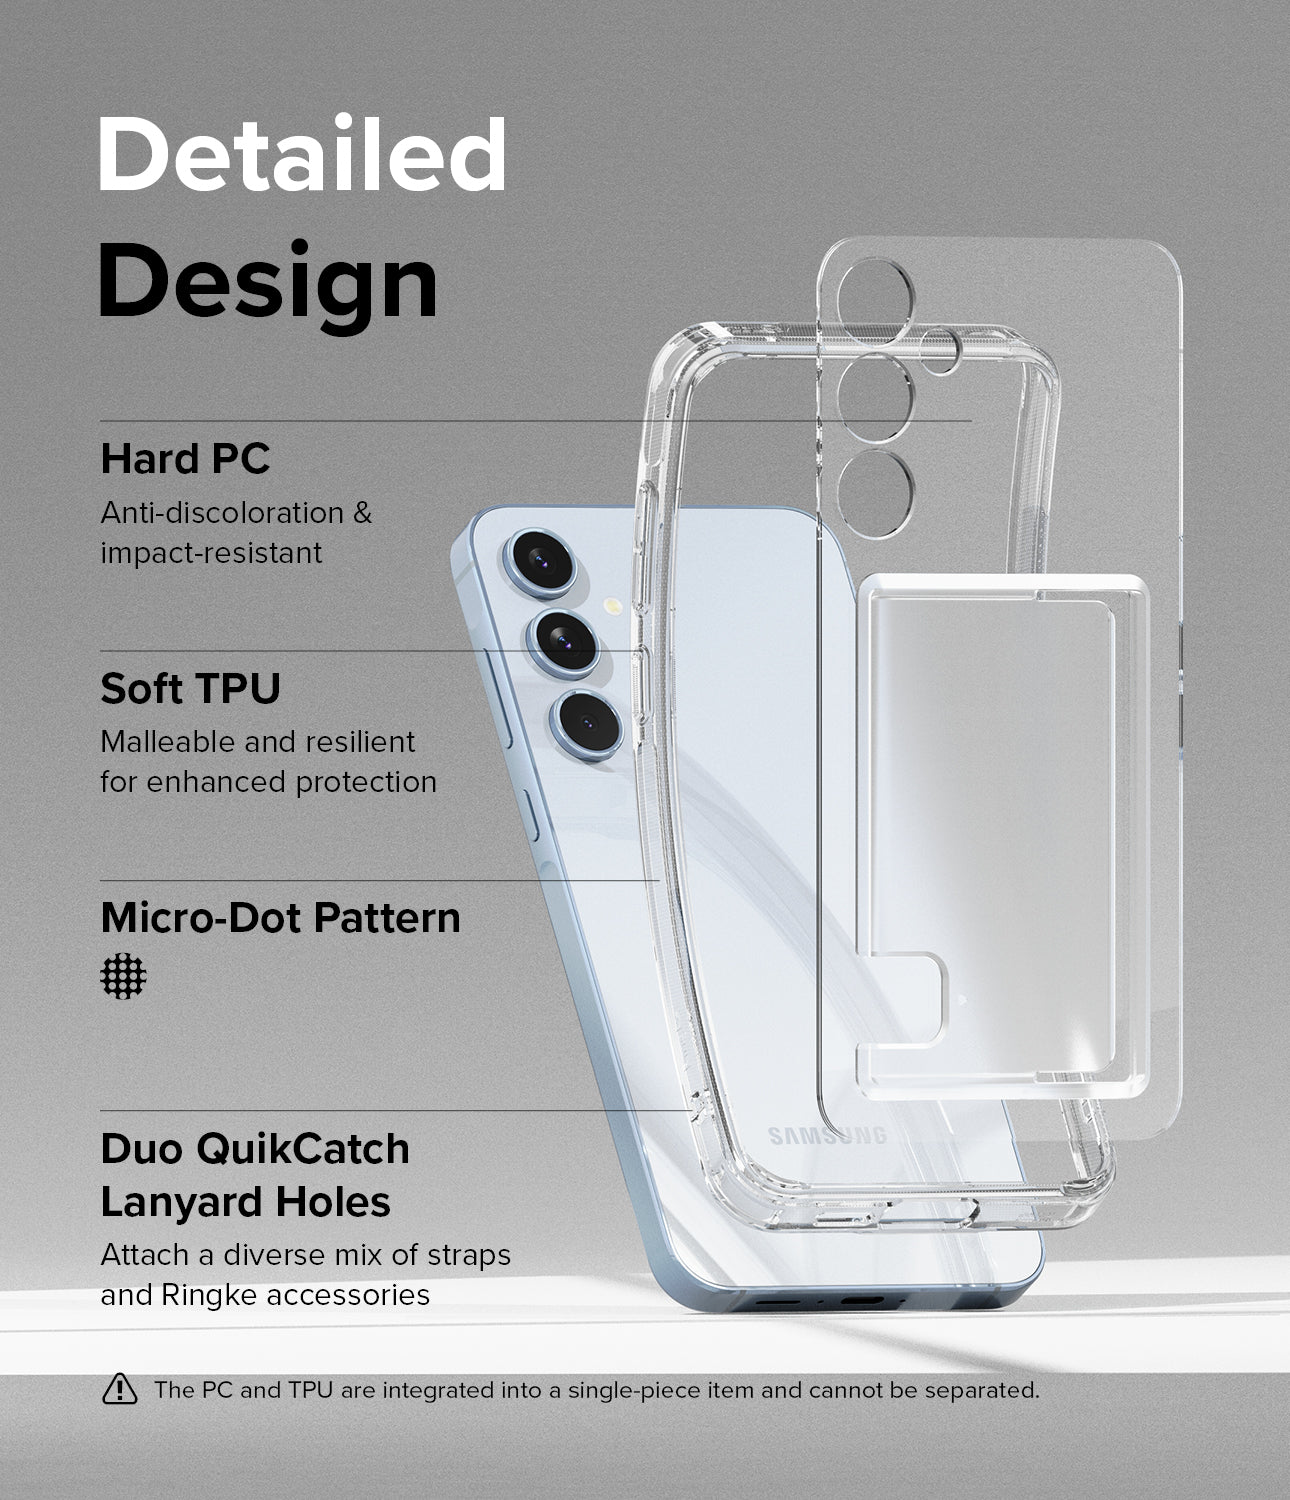 Galaxy A55 Case | Fusion Card - Detailed Design. Anti-discoloration and impact resistant with Hard PC. Malleable and resilient for enhanced protection with soft TPU. Micro-Dot Pattern. Duo QuikCatch Lanyard Holes to attach a diverse mix of straps and Ringke accessories.